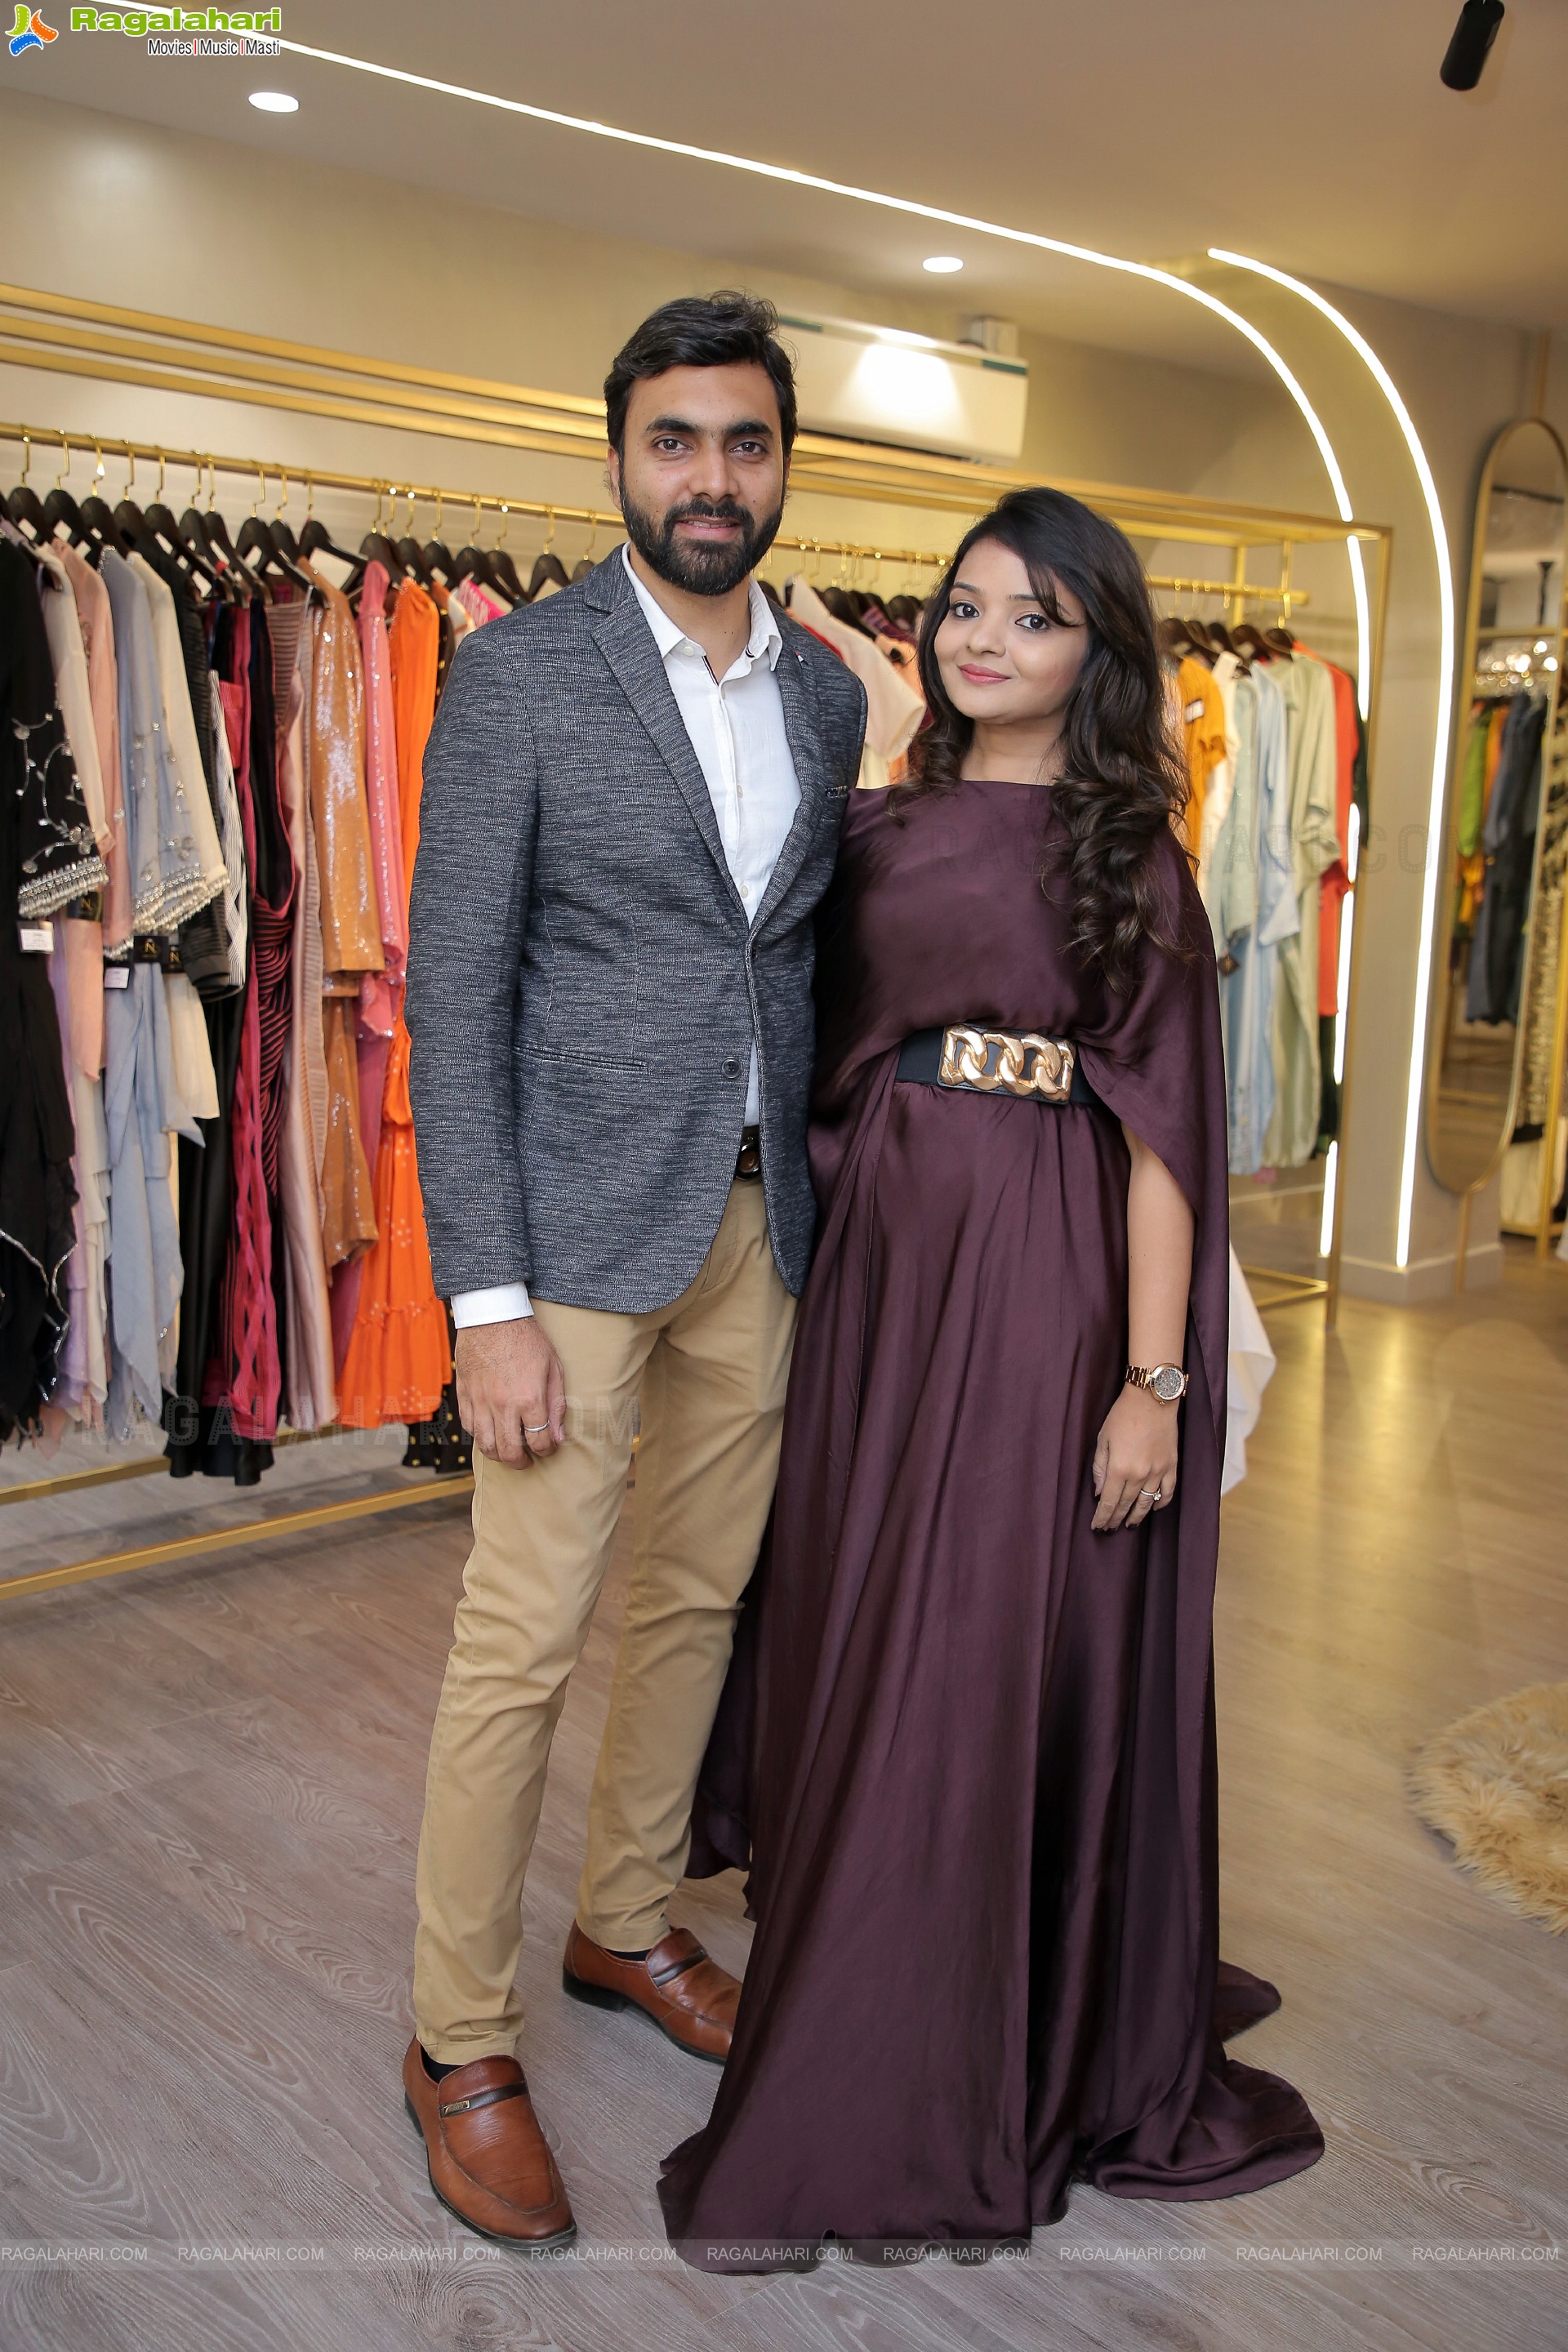 N' Couture, A Fashion Boutique Launch at Banjara Hills, Hyderabad